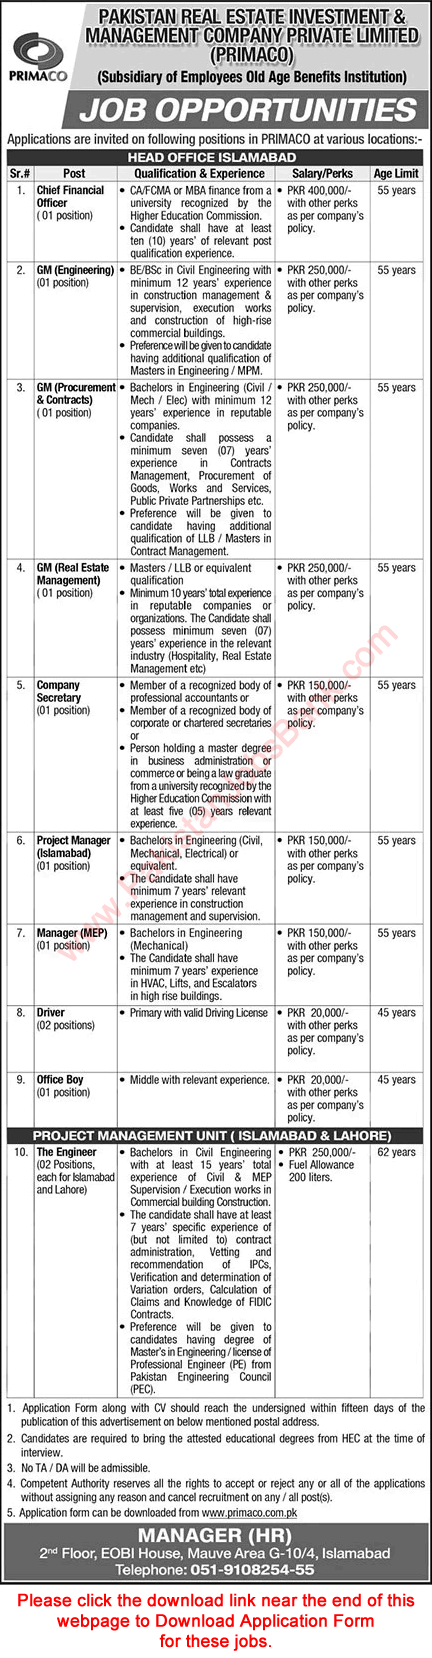 PRIMACO Jobs October 2021 November Application Form Pakistan Real Estate Investment and Management Company Latest